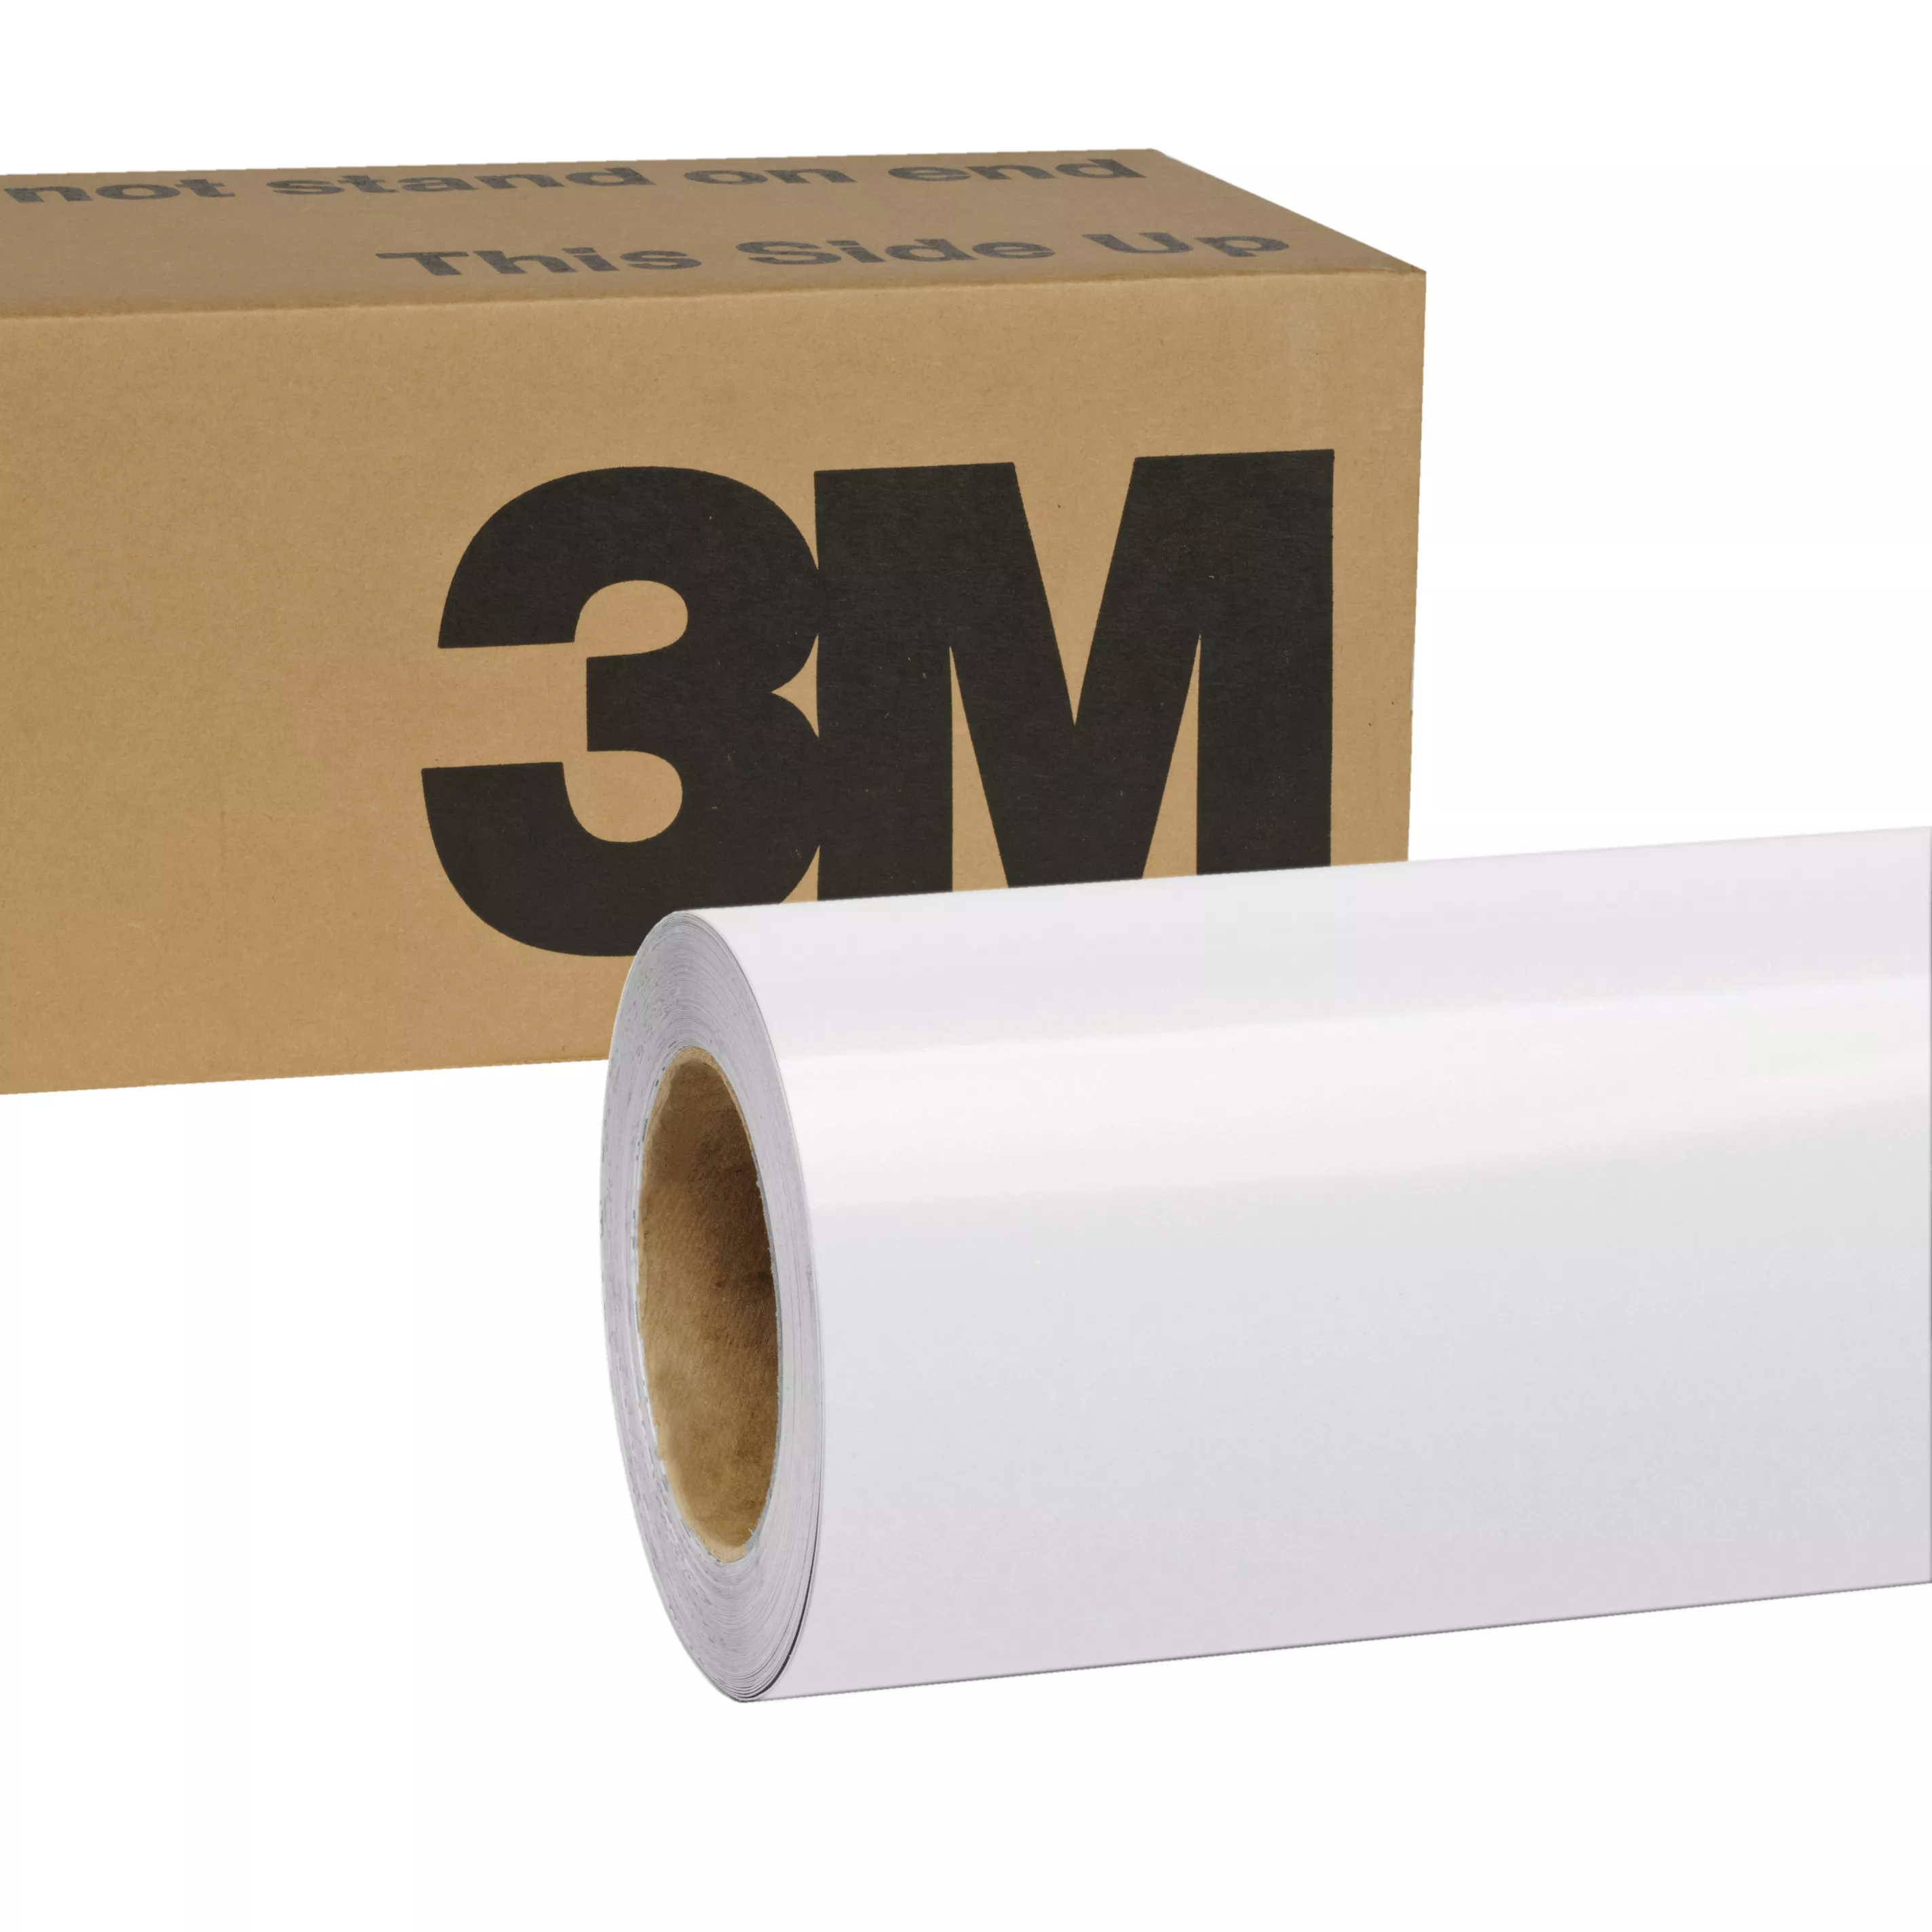 3M™ Wrap Film 1080-G247, Gloss White Gold Sparkle, 60 in x 10 yd